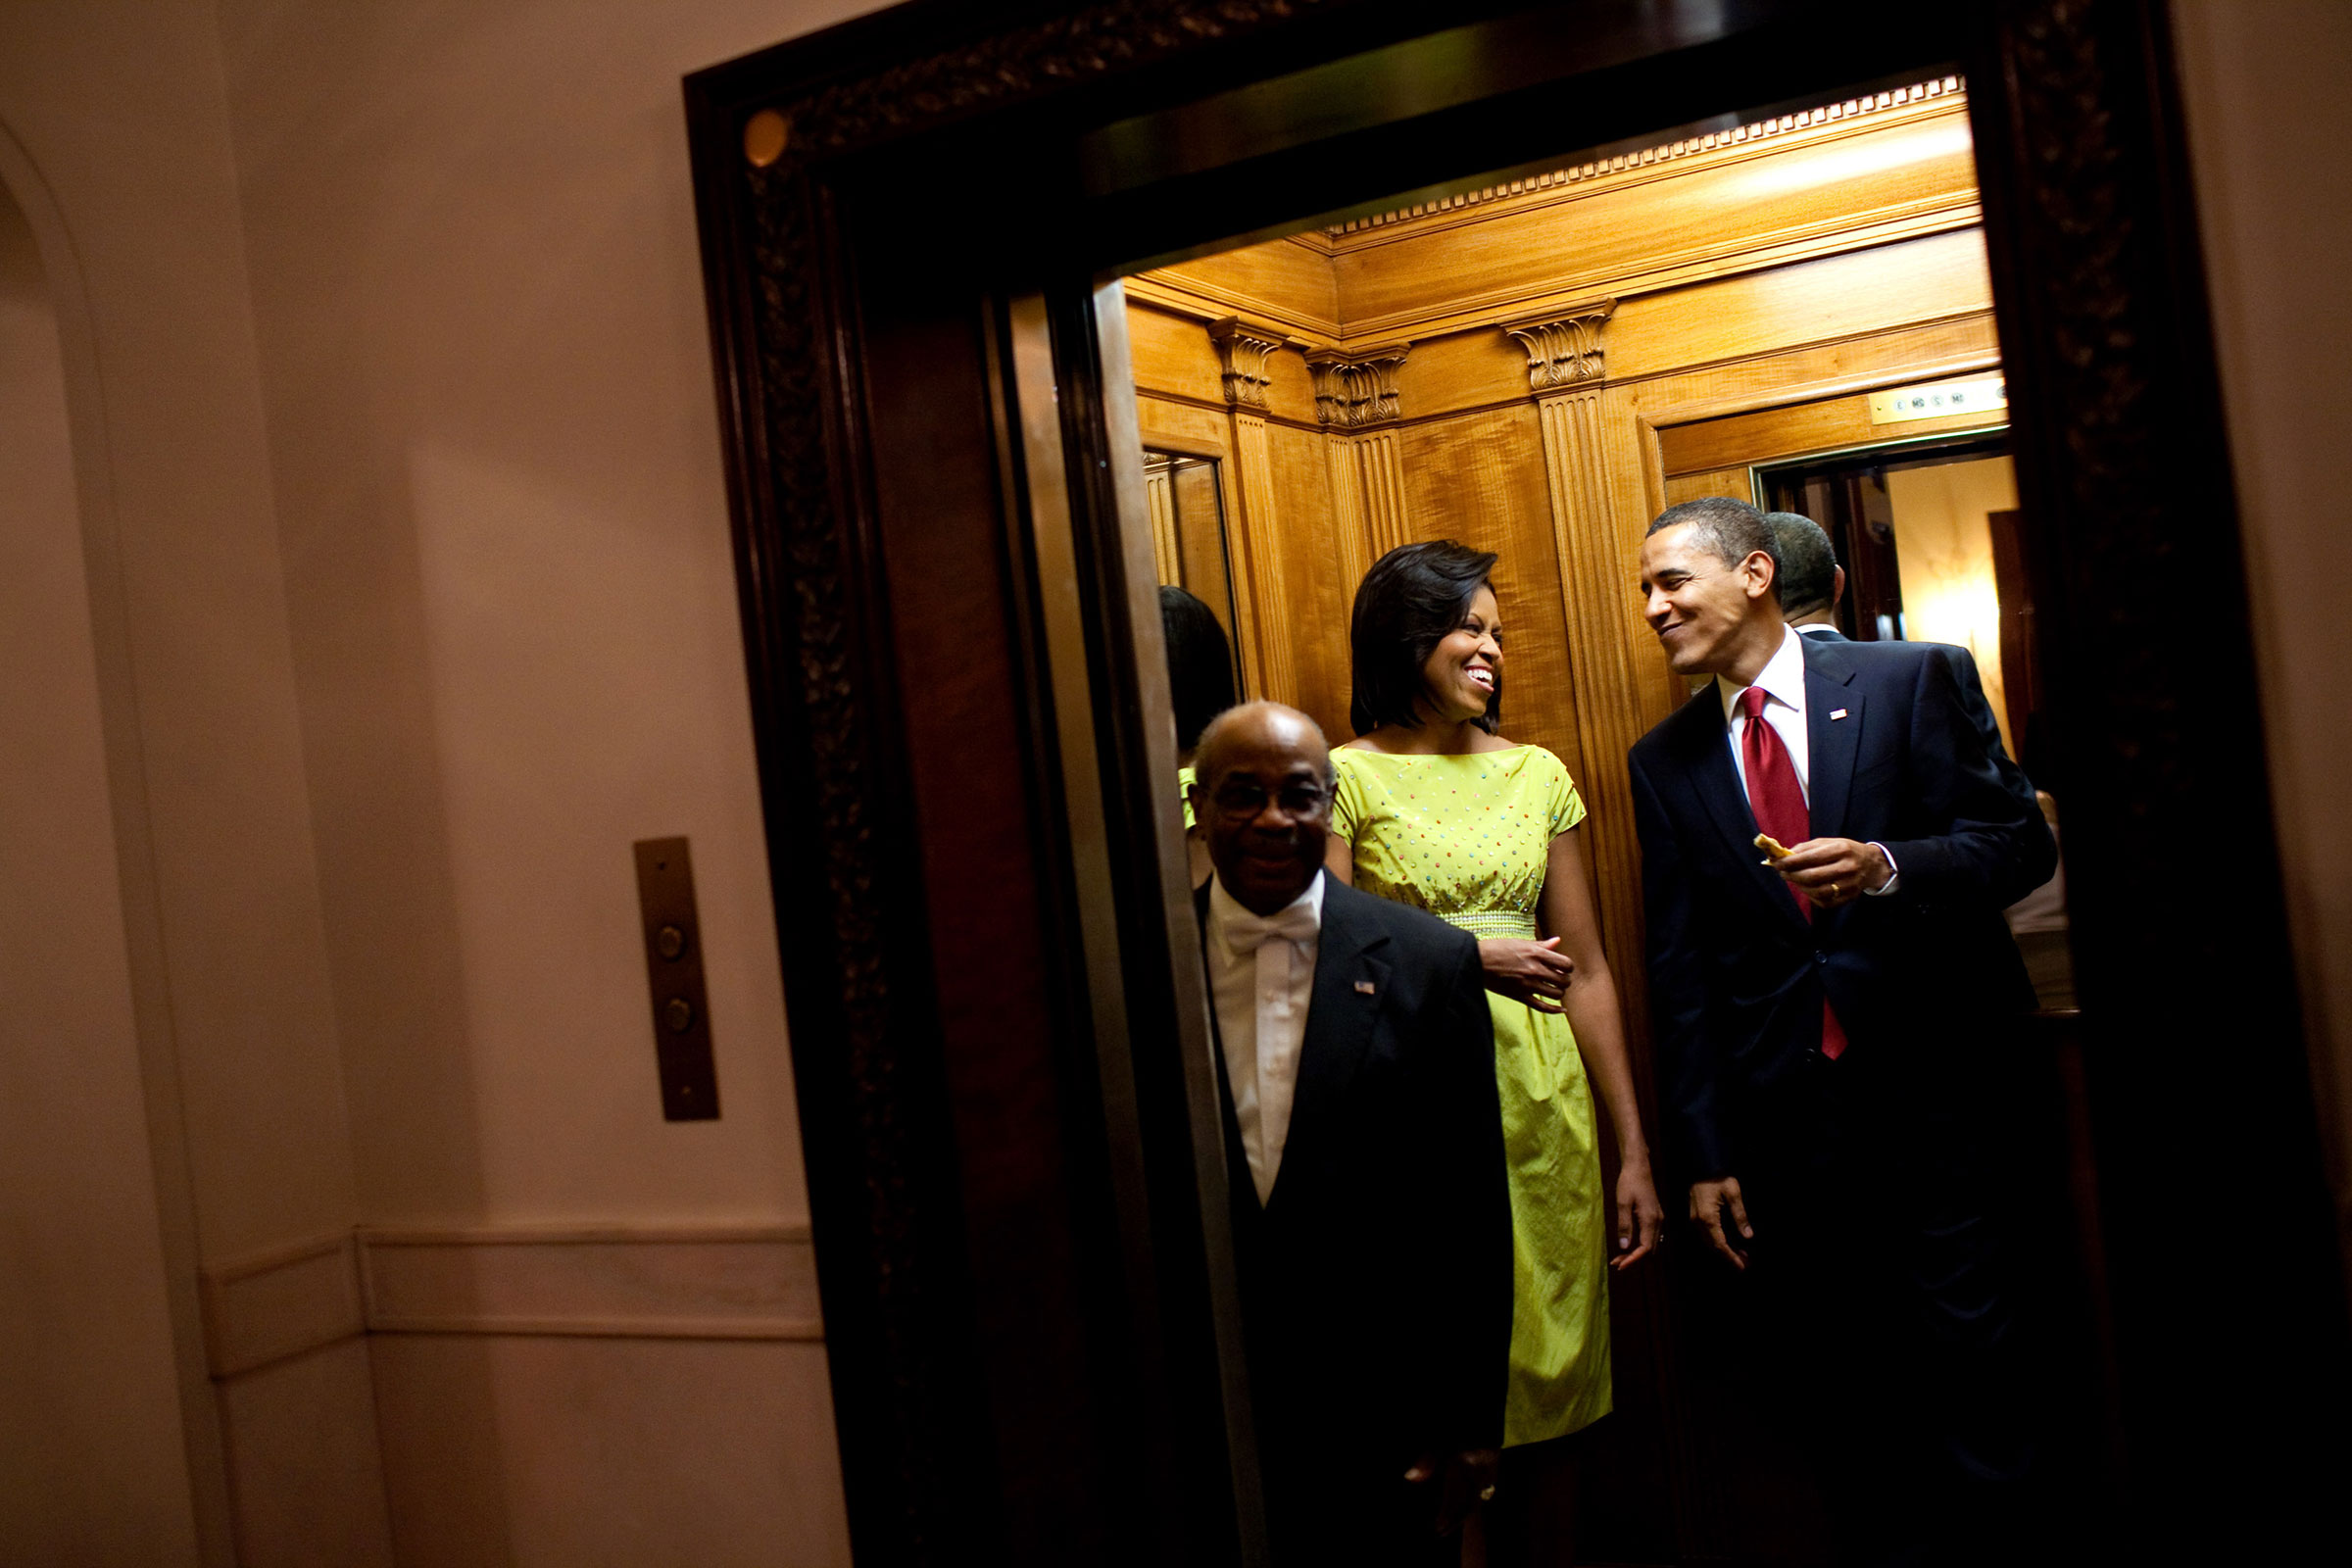 Wilson Roosevelt Jerman and the Obamas on on May 4, 2009. (Samantha Appleton—White House/Getty Images)